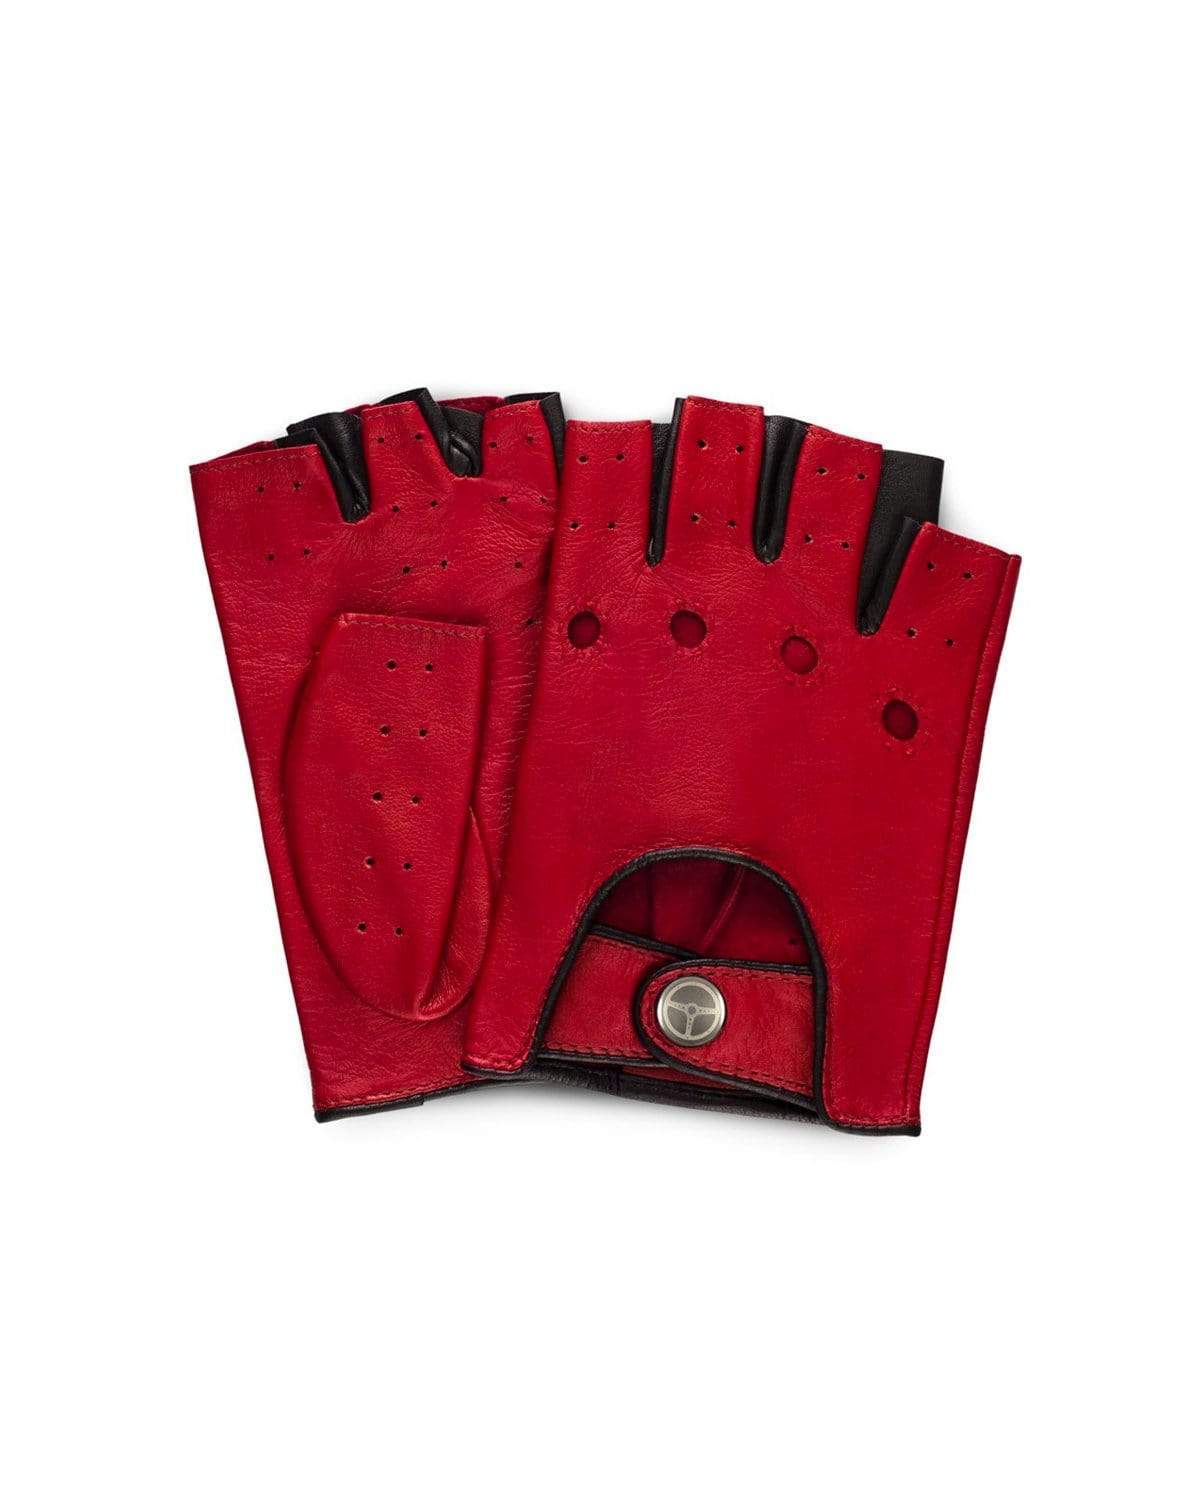 Leather Fingerless Gloves Bikers Weight Trainer Driver Red Black Brown  White USA